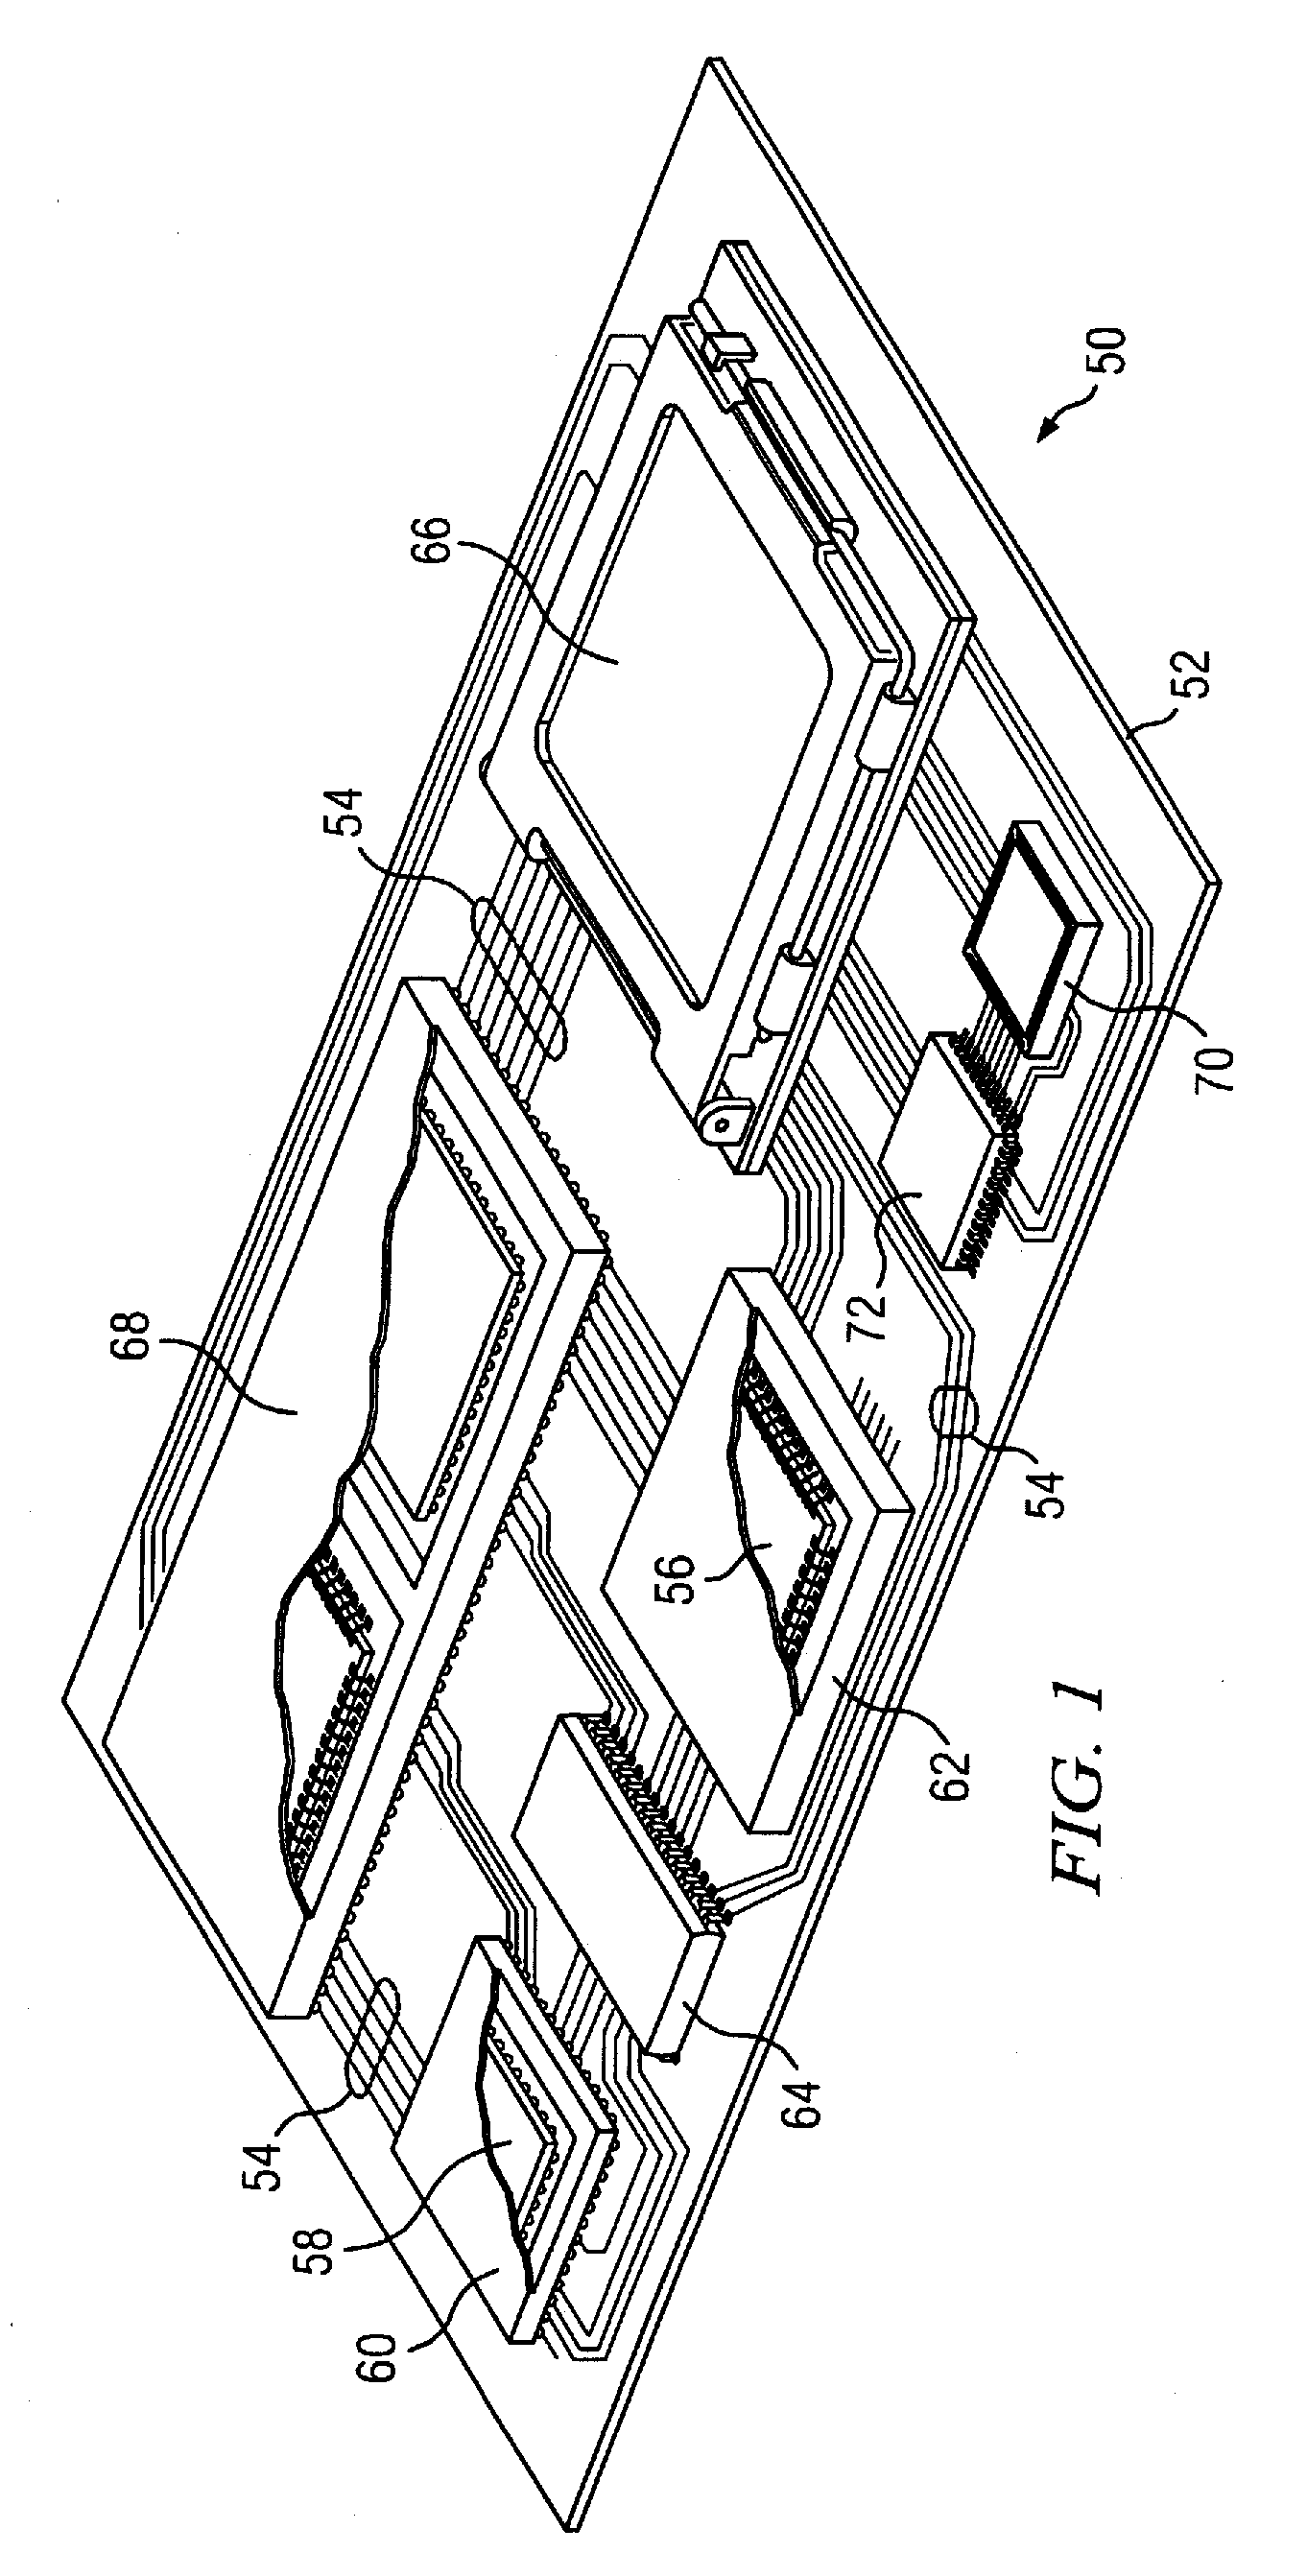 Semiconductor Device and Method of Forming Dam Material Around Periphery of Die to Reduce Warpage